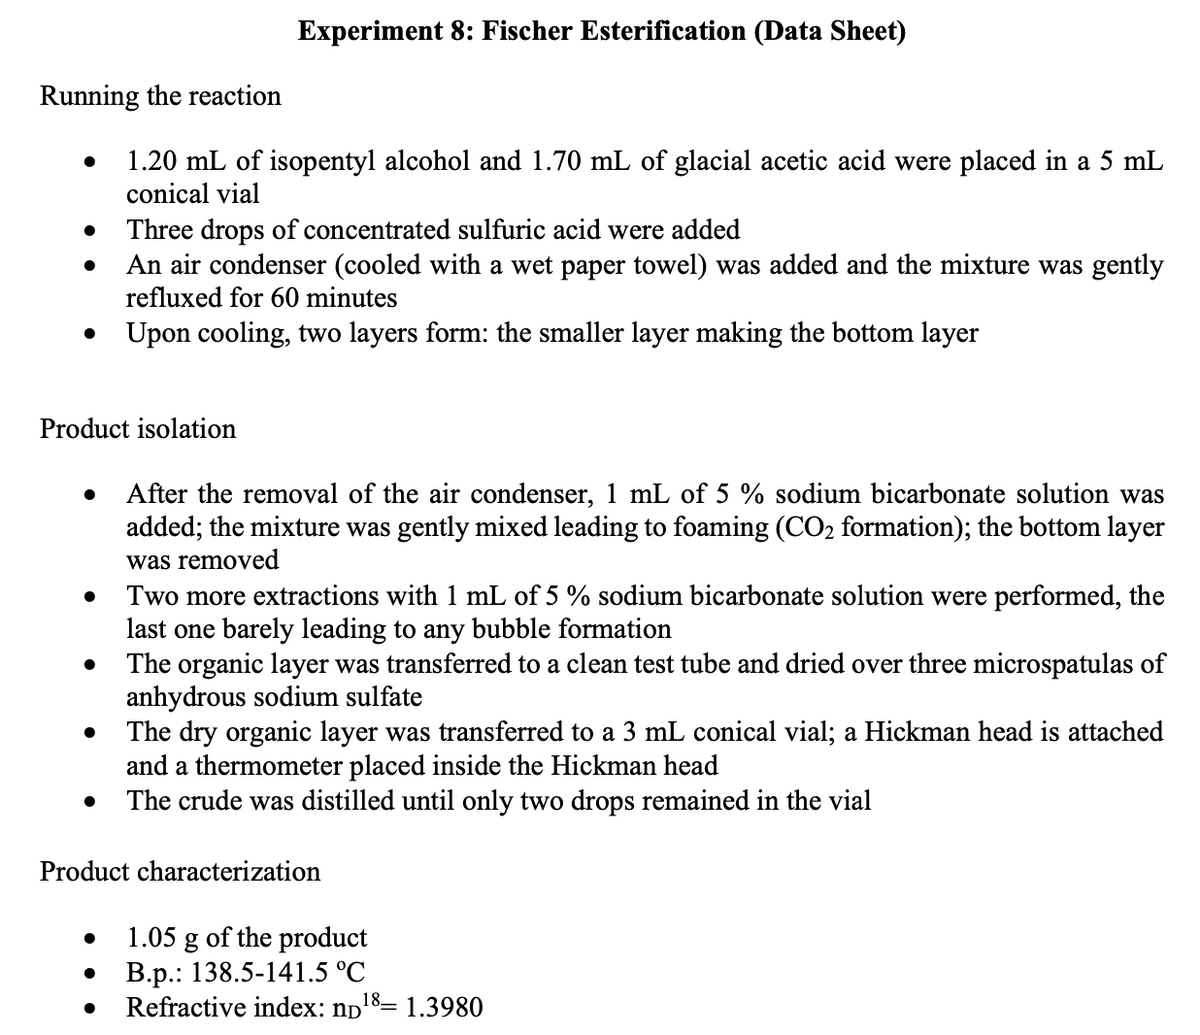 Experiment 8: Fischer Esterification (Data Sheet)
Running the reaction
1.20 mL of isopentyl alcohol and 1.70 mL of glacial acetic acid were placed in a 5 mL
conical vial
Three drops of concentrated sulfuric acid were added
An air condenser (cooled with a wet paper towel) was added and the mixture was gently
refluxed for 60 minutes
Upon cooling, two layers form: the smaller layer making the bottom layer
Product isolation
After the removal of the air condenser, 1 mL of 5 % sodium bicarbonate solution was
added; the mixture was gently mixed leading to foaming (CO2 formation); the bottom layer
was removed
Two more extractions with 1 mL of 5 % sodium bicarbonate solution were performed, the
last one barely leading to any bubble formation
The organic layer was transferred to a clean test tube and dried over three microspatulas of
anhydrous sodium sulfate
The dry organic layer was transferred to a 3 mL conical vial; a Hickman head is attached
and a thermometer placed inside the Hickman head
The crude was distilled until only two drops remained in the vial
Product characterization
1.05 g of the product
B.p.: 138.5-141.5 °C
Refractive index: np18= 1.3980
